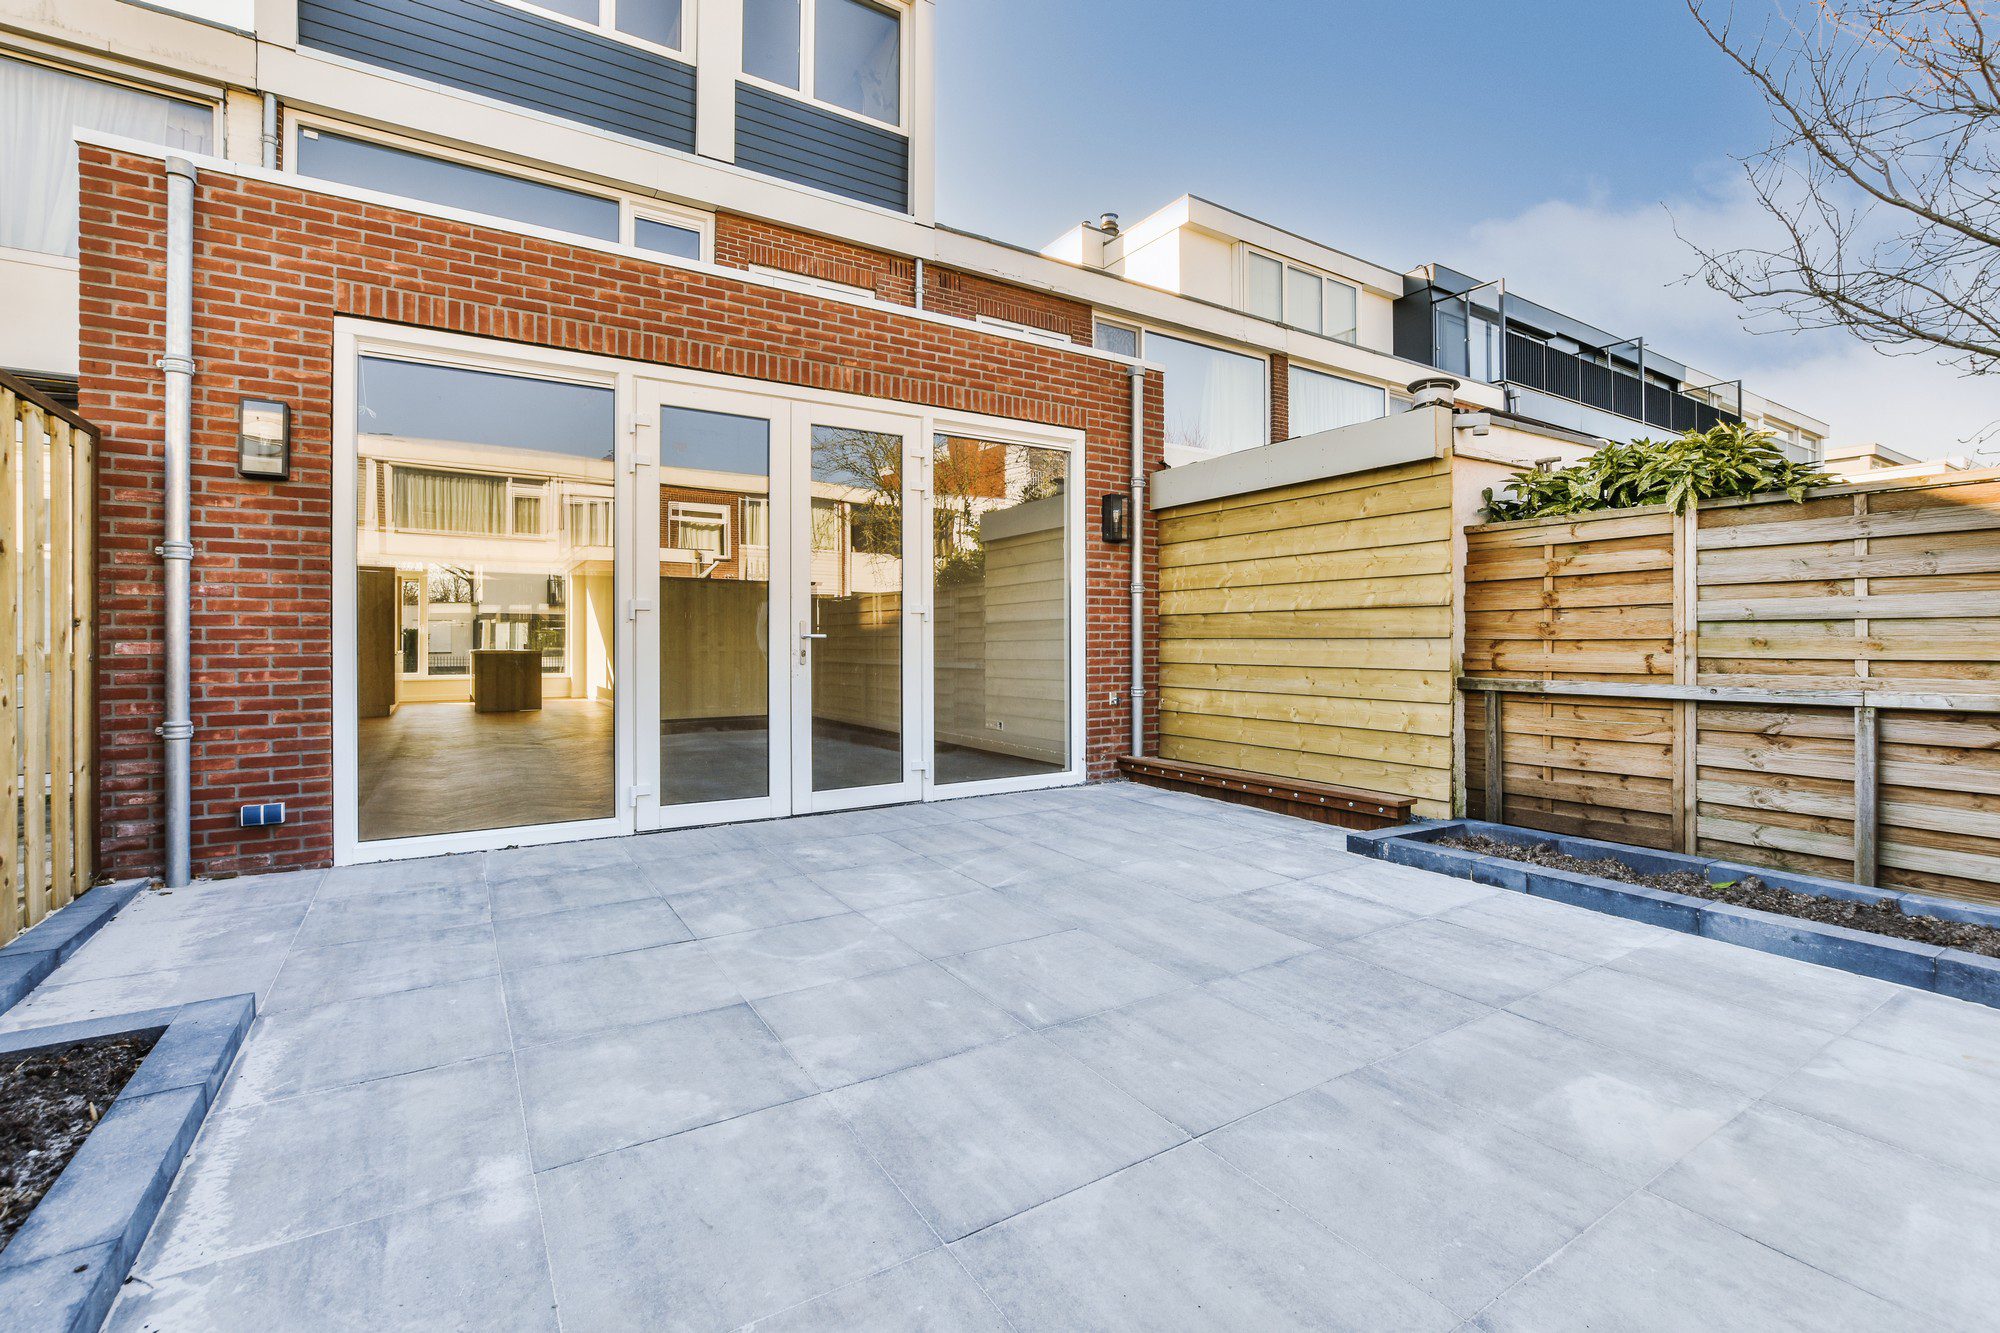 This image shows the exterior patio area of a modern residential building. The patio has large paving slabs that create a smooth and spacious appearance. The building features a mix of materials including red brickwork and what appears to be cladding or metal on the upper portions, giving it a contemporary look.There are full-height glazing doors that likely lead to the interior living spaces, providing ample natural light and ease of access between indoor and outdoor areas. To the right is a wooden fence that provides privacy to the patio area. Above, on the second level, there is a balcony with a railing, suggesting that there might be access to this outdoor space from the upper level of the home.No people are visible in the image, and it has a clean, simple aesthetic that is often sought after in modern residential design. The clear sky and sunlight suggest that the photo was taken on a bright day.